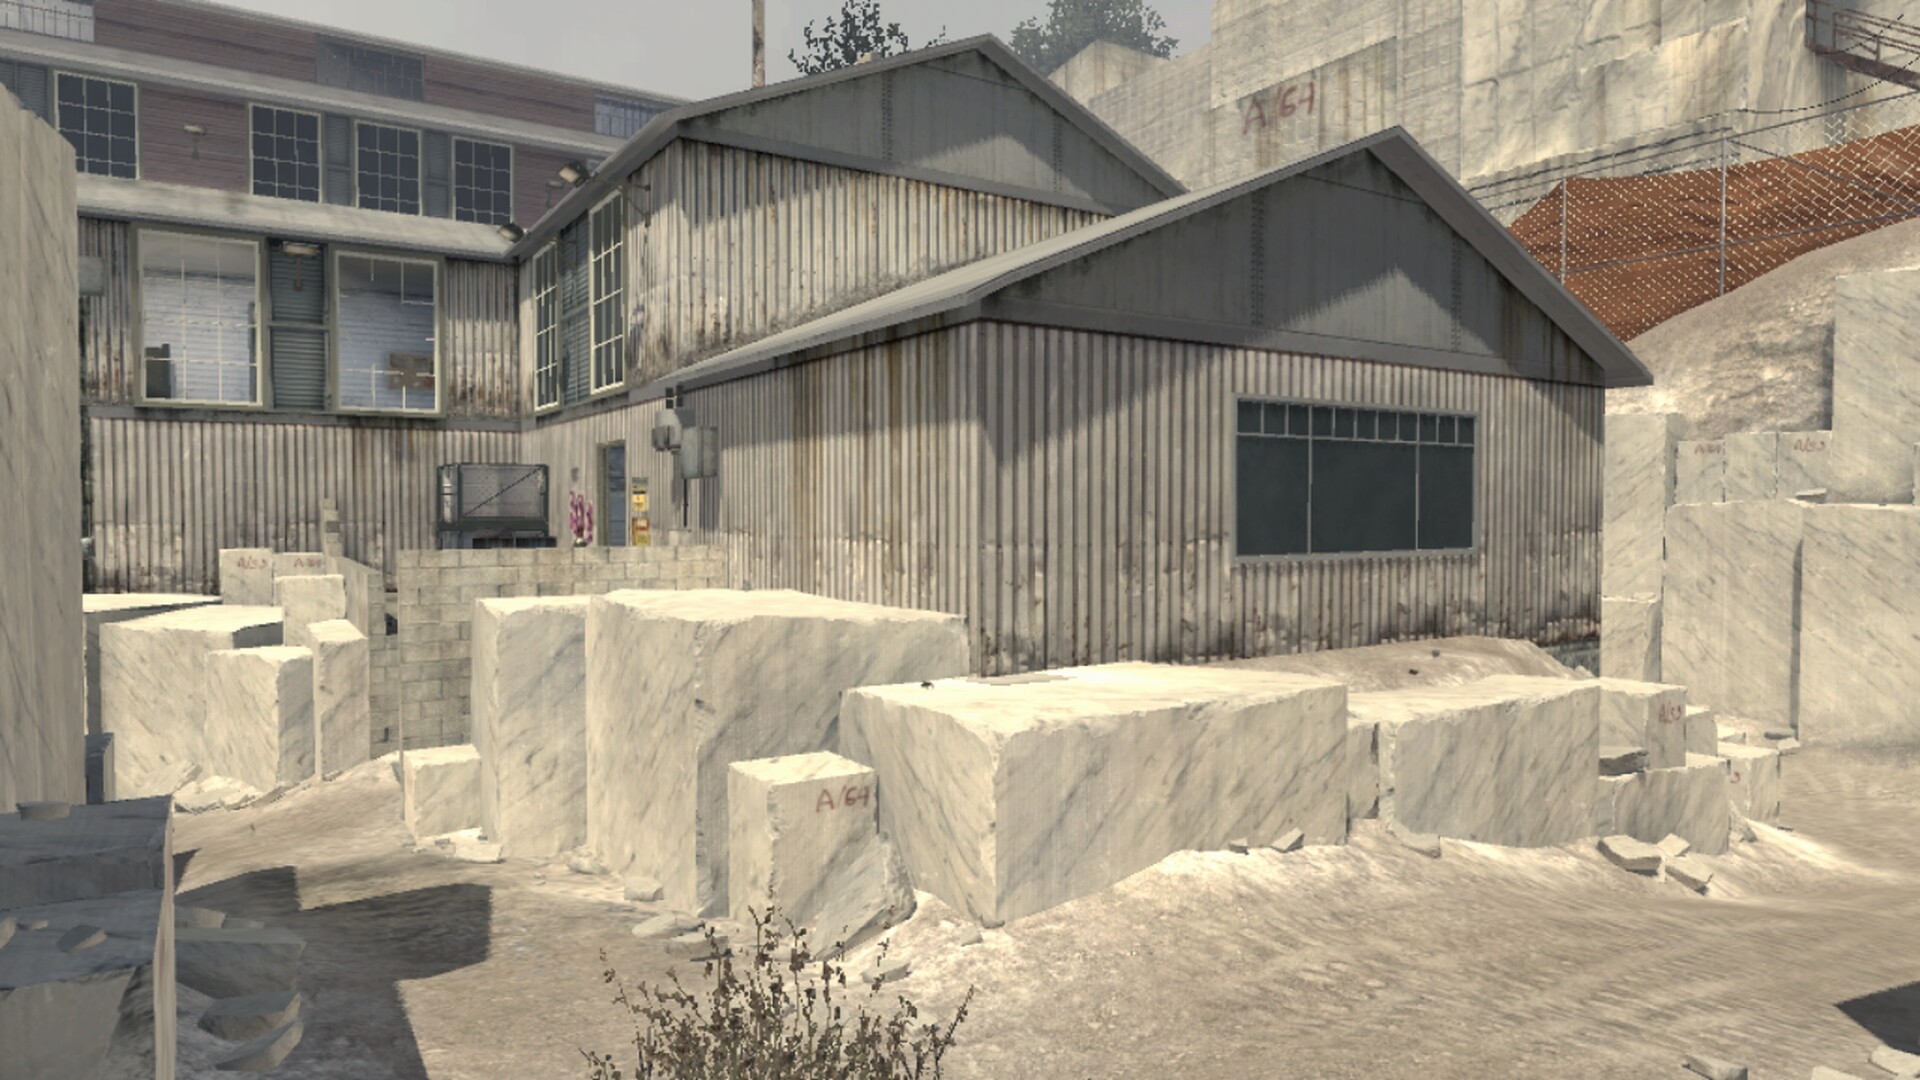 Quarry, Call of Duty Wiki